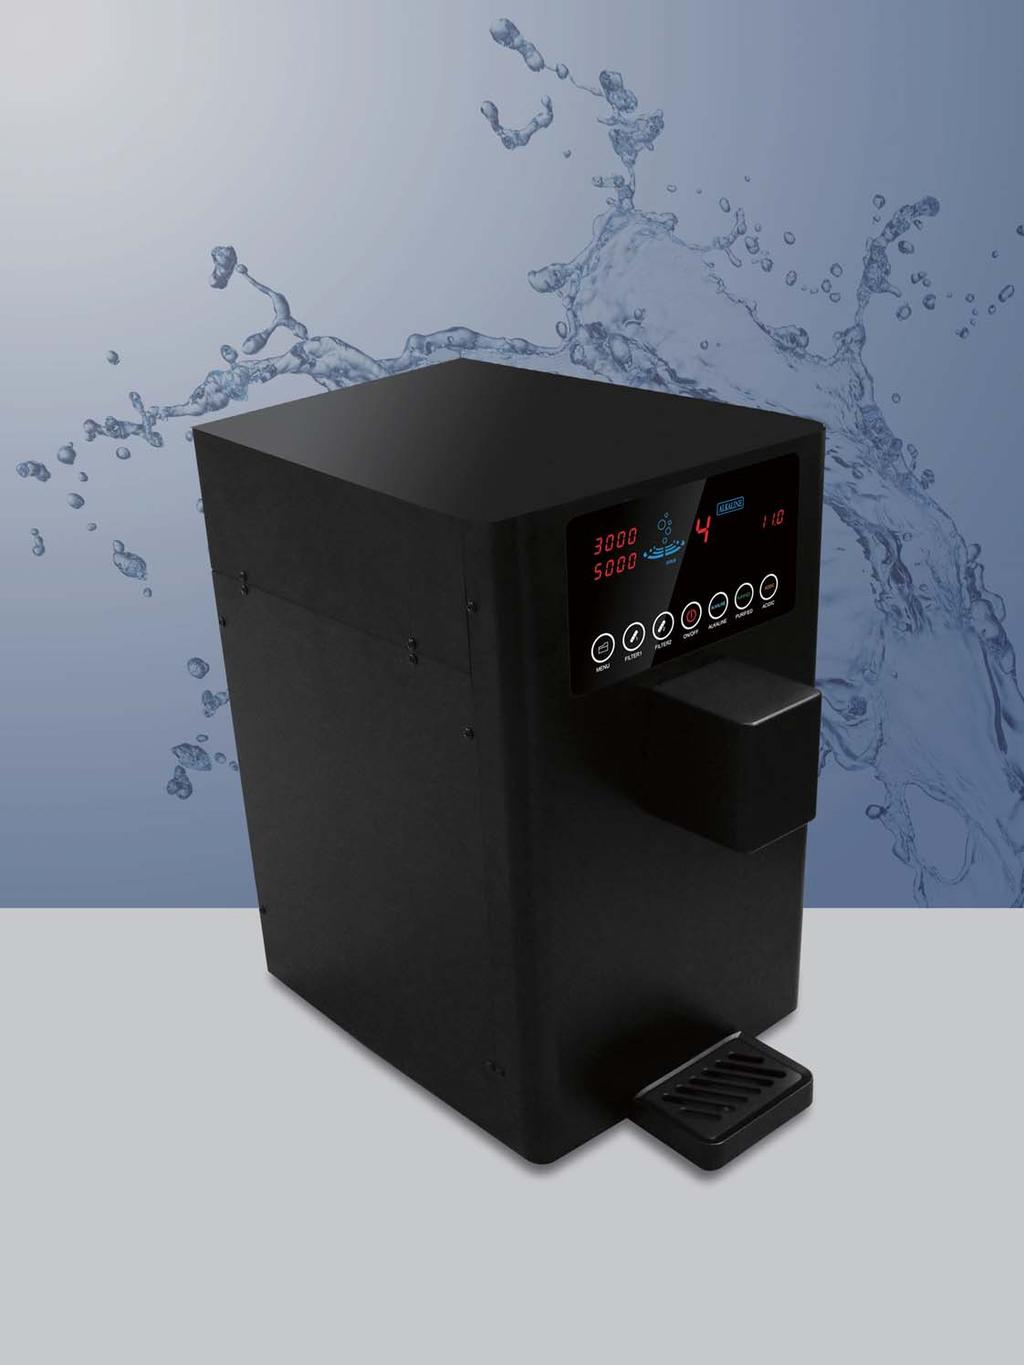 The Industry Leader in lkaline Water Ionizer Technology PREMIUM SEMI COMMERCIL LKLINE WTER IONIZER USER MNUL PRIME WTER PREMIUM LKLINE WTER IONIZER PRIME LC-11 www.primewater.co.